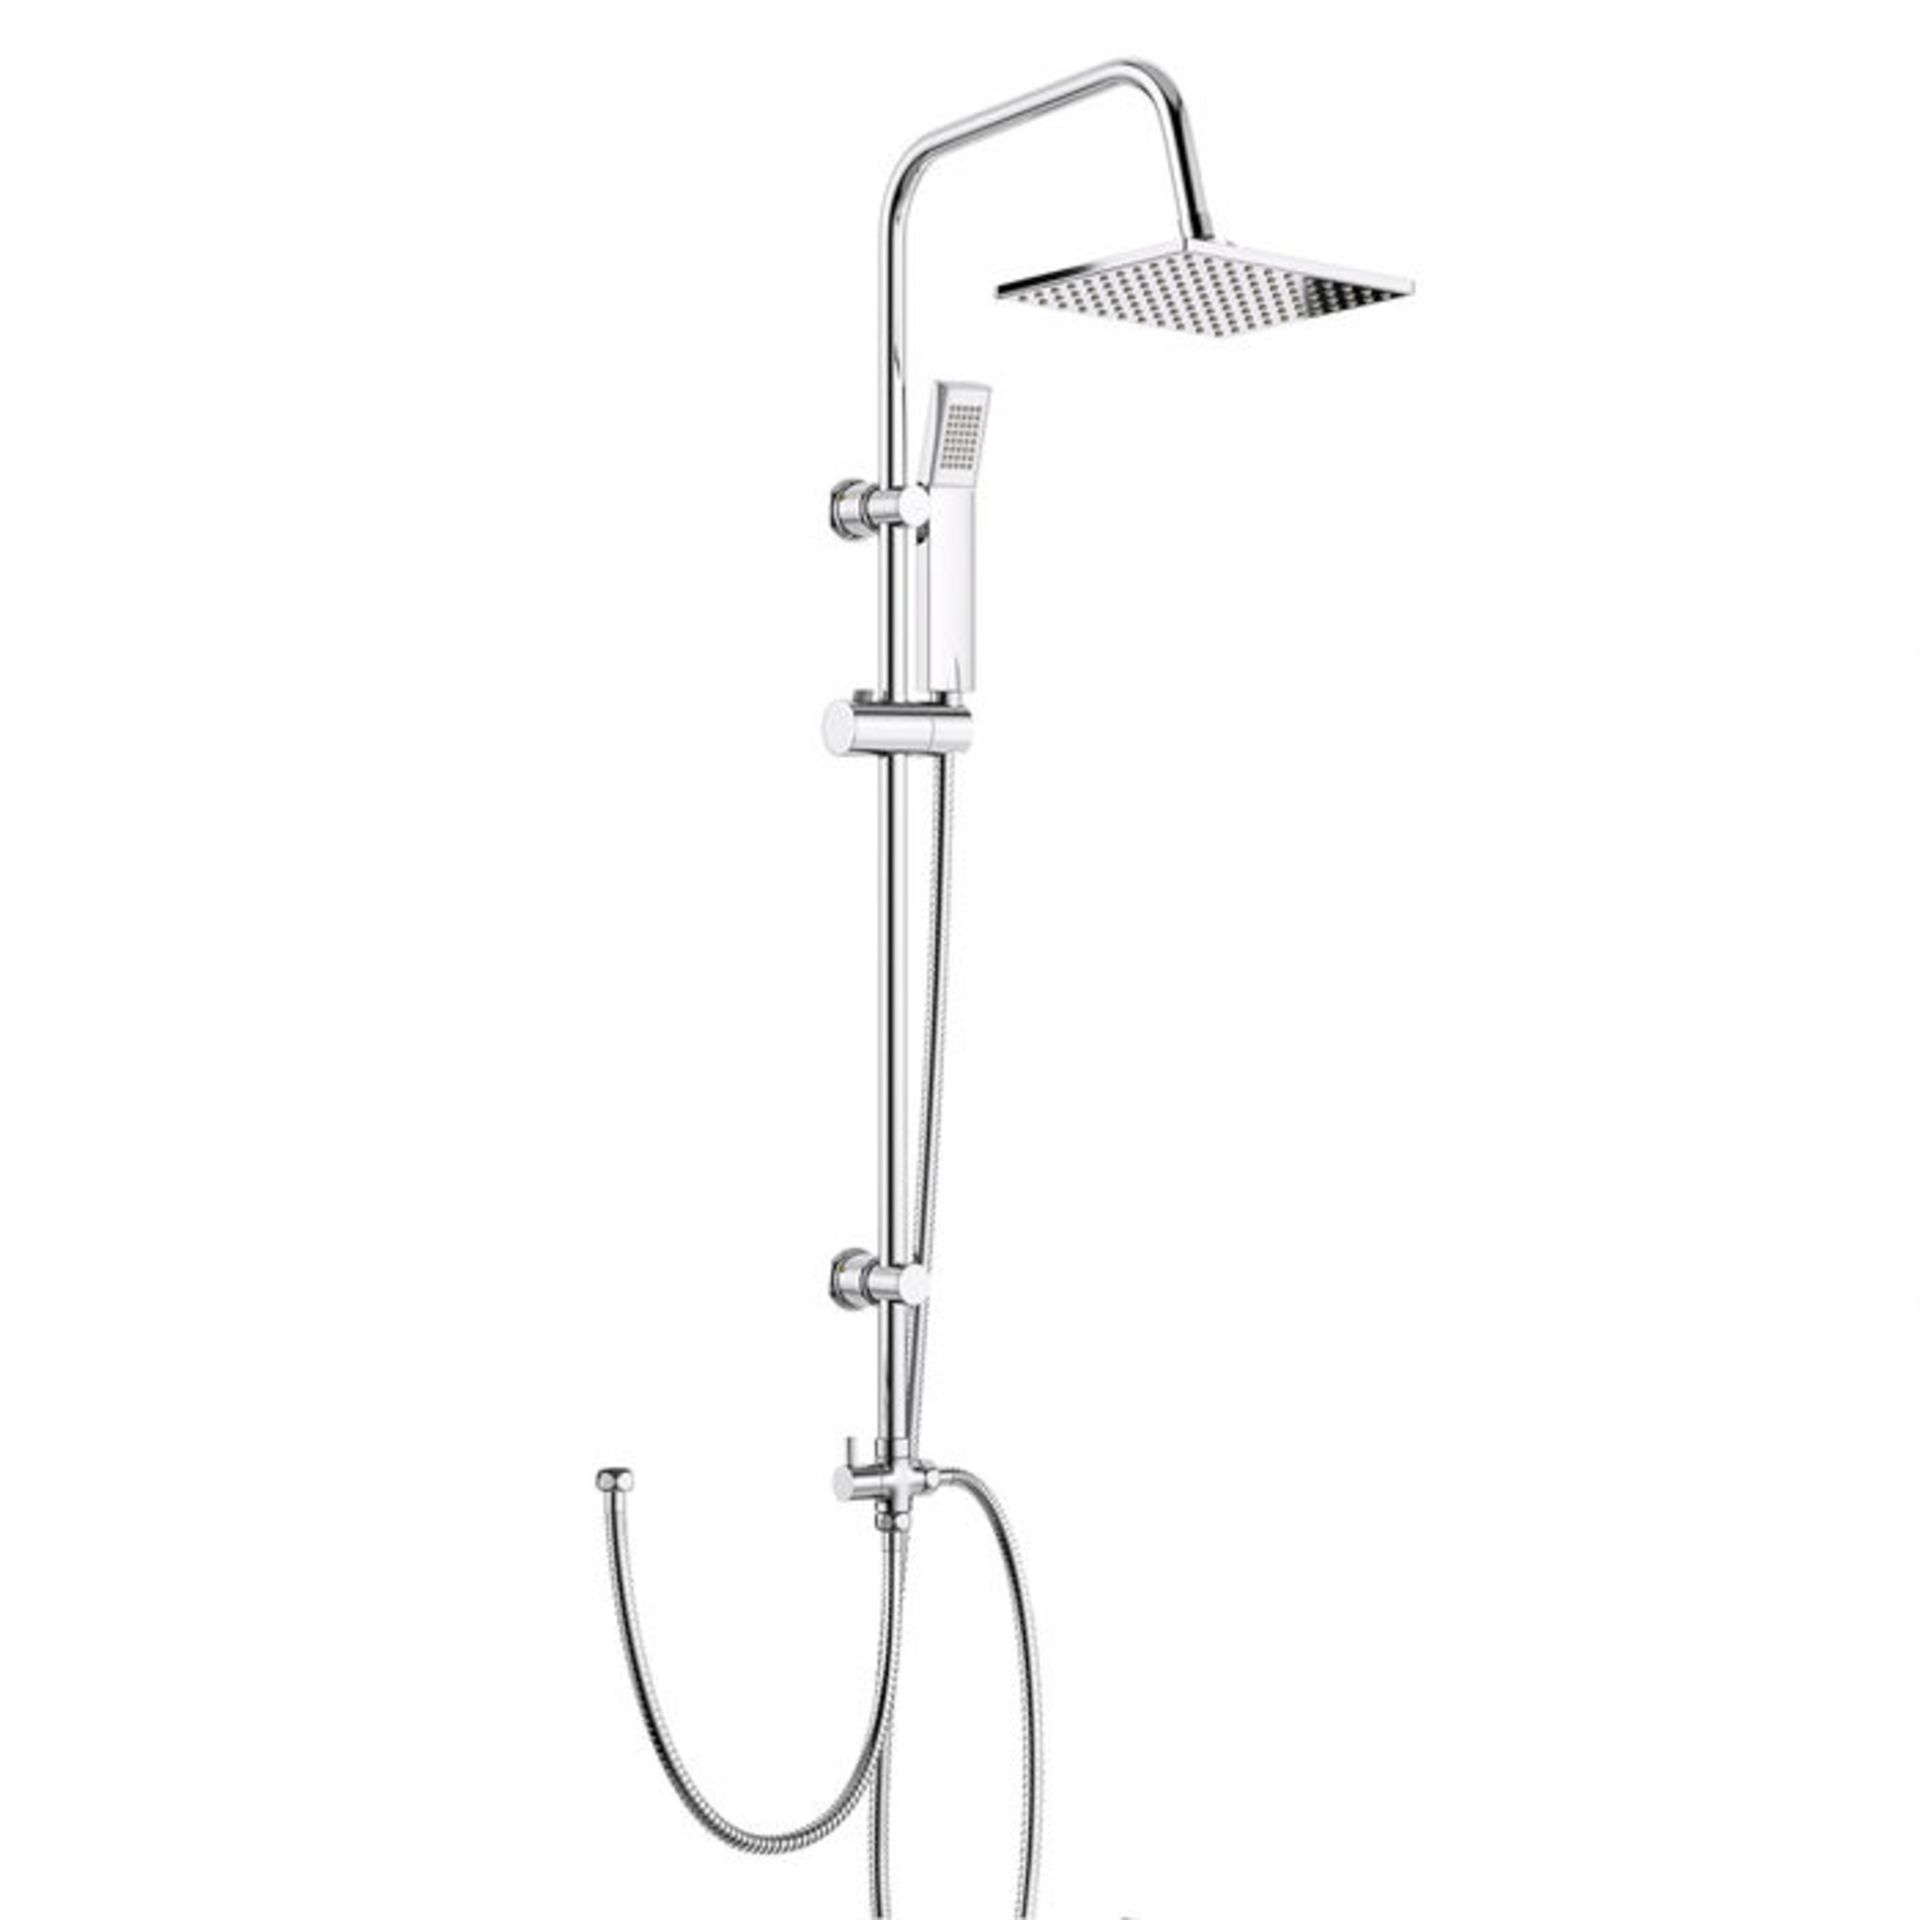 (P160) 200mm Square Head, Riser Rail & Handheld Kit. Quality stainless steel shower head with Easy - Image 2 of 4